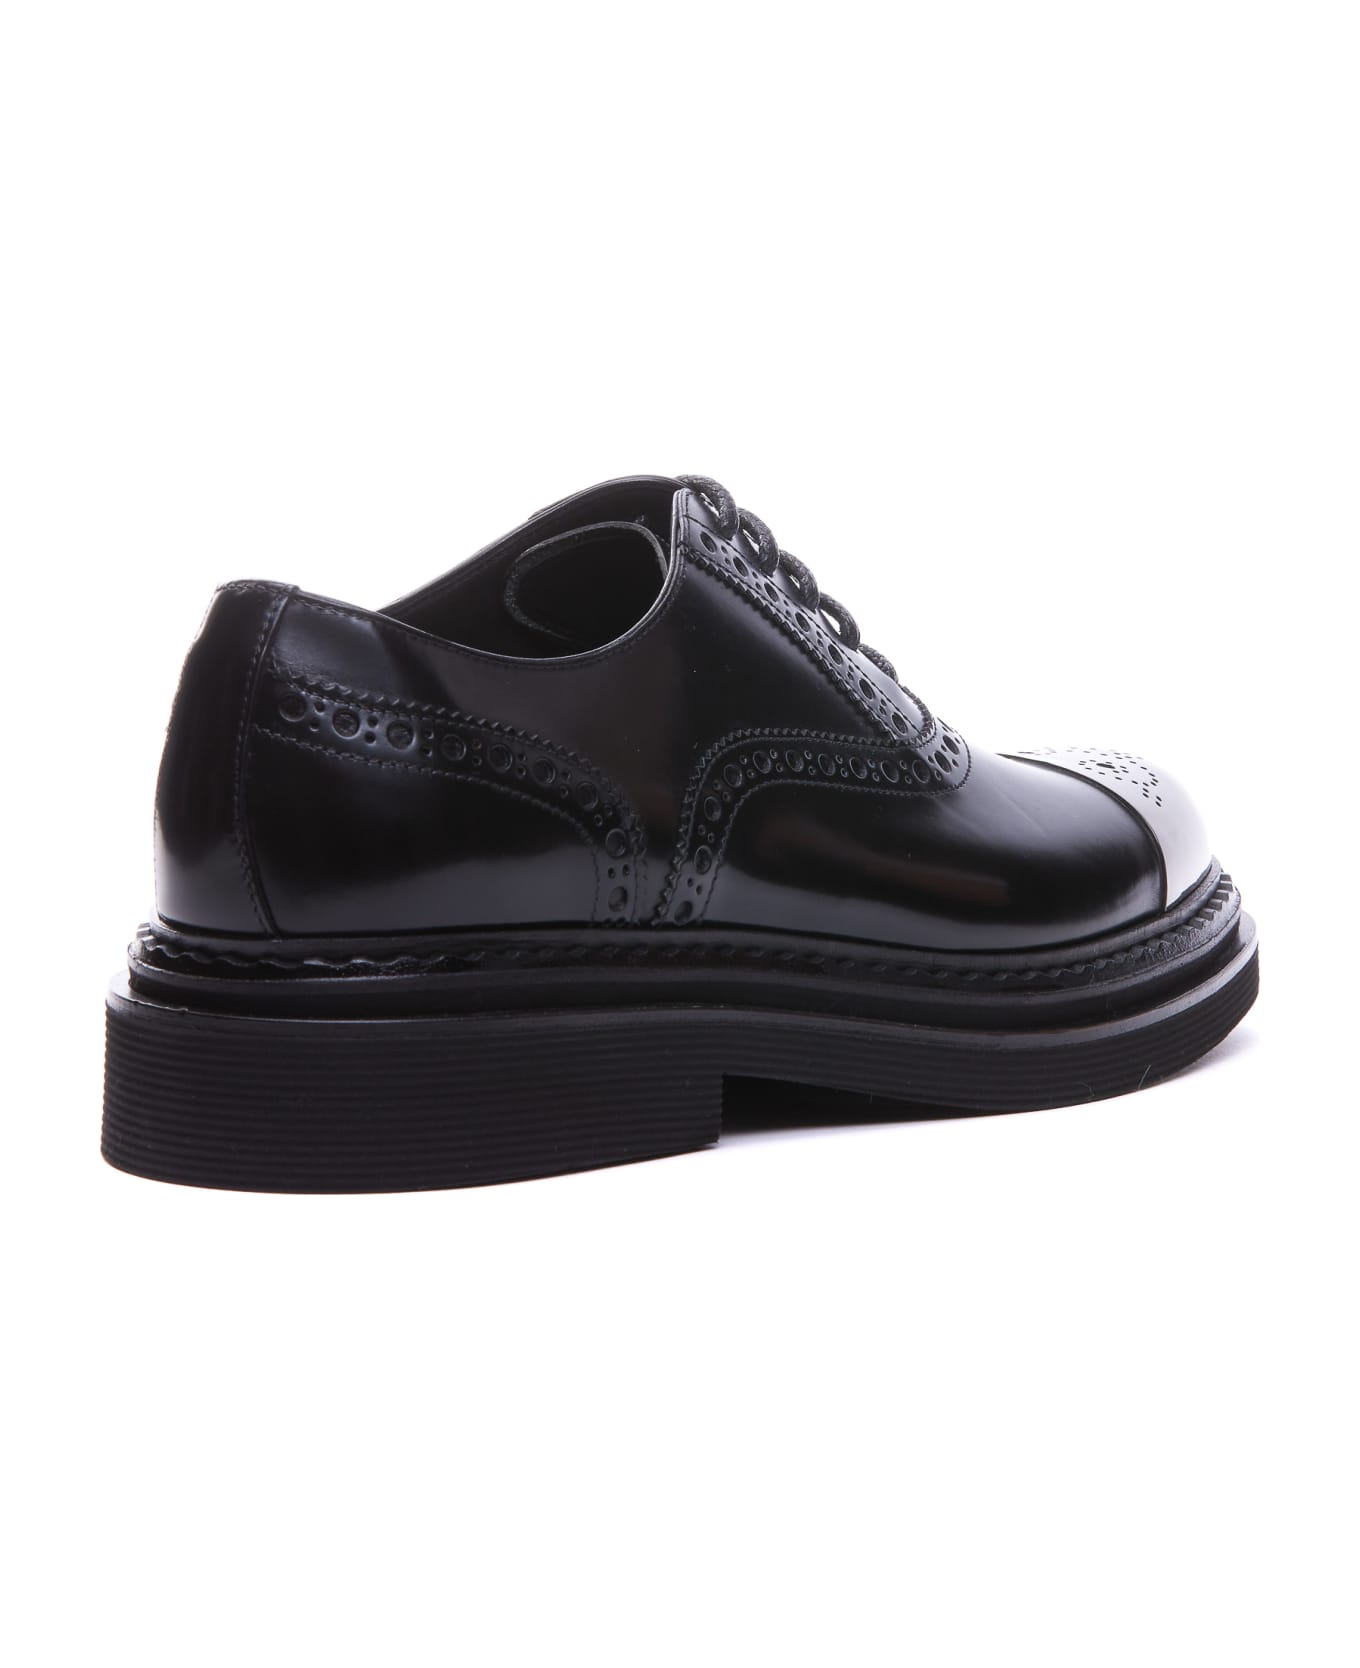 Dolce & Gabbana Derby Lace Up Shoes - black ローファー＆デッキシューズ